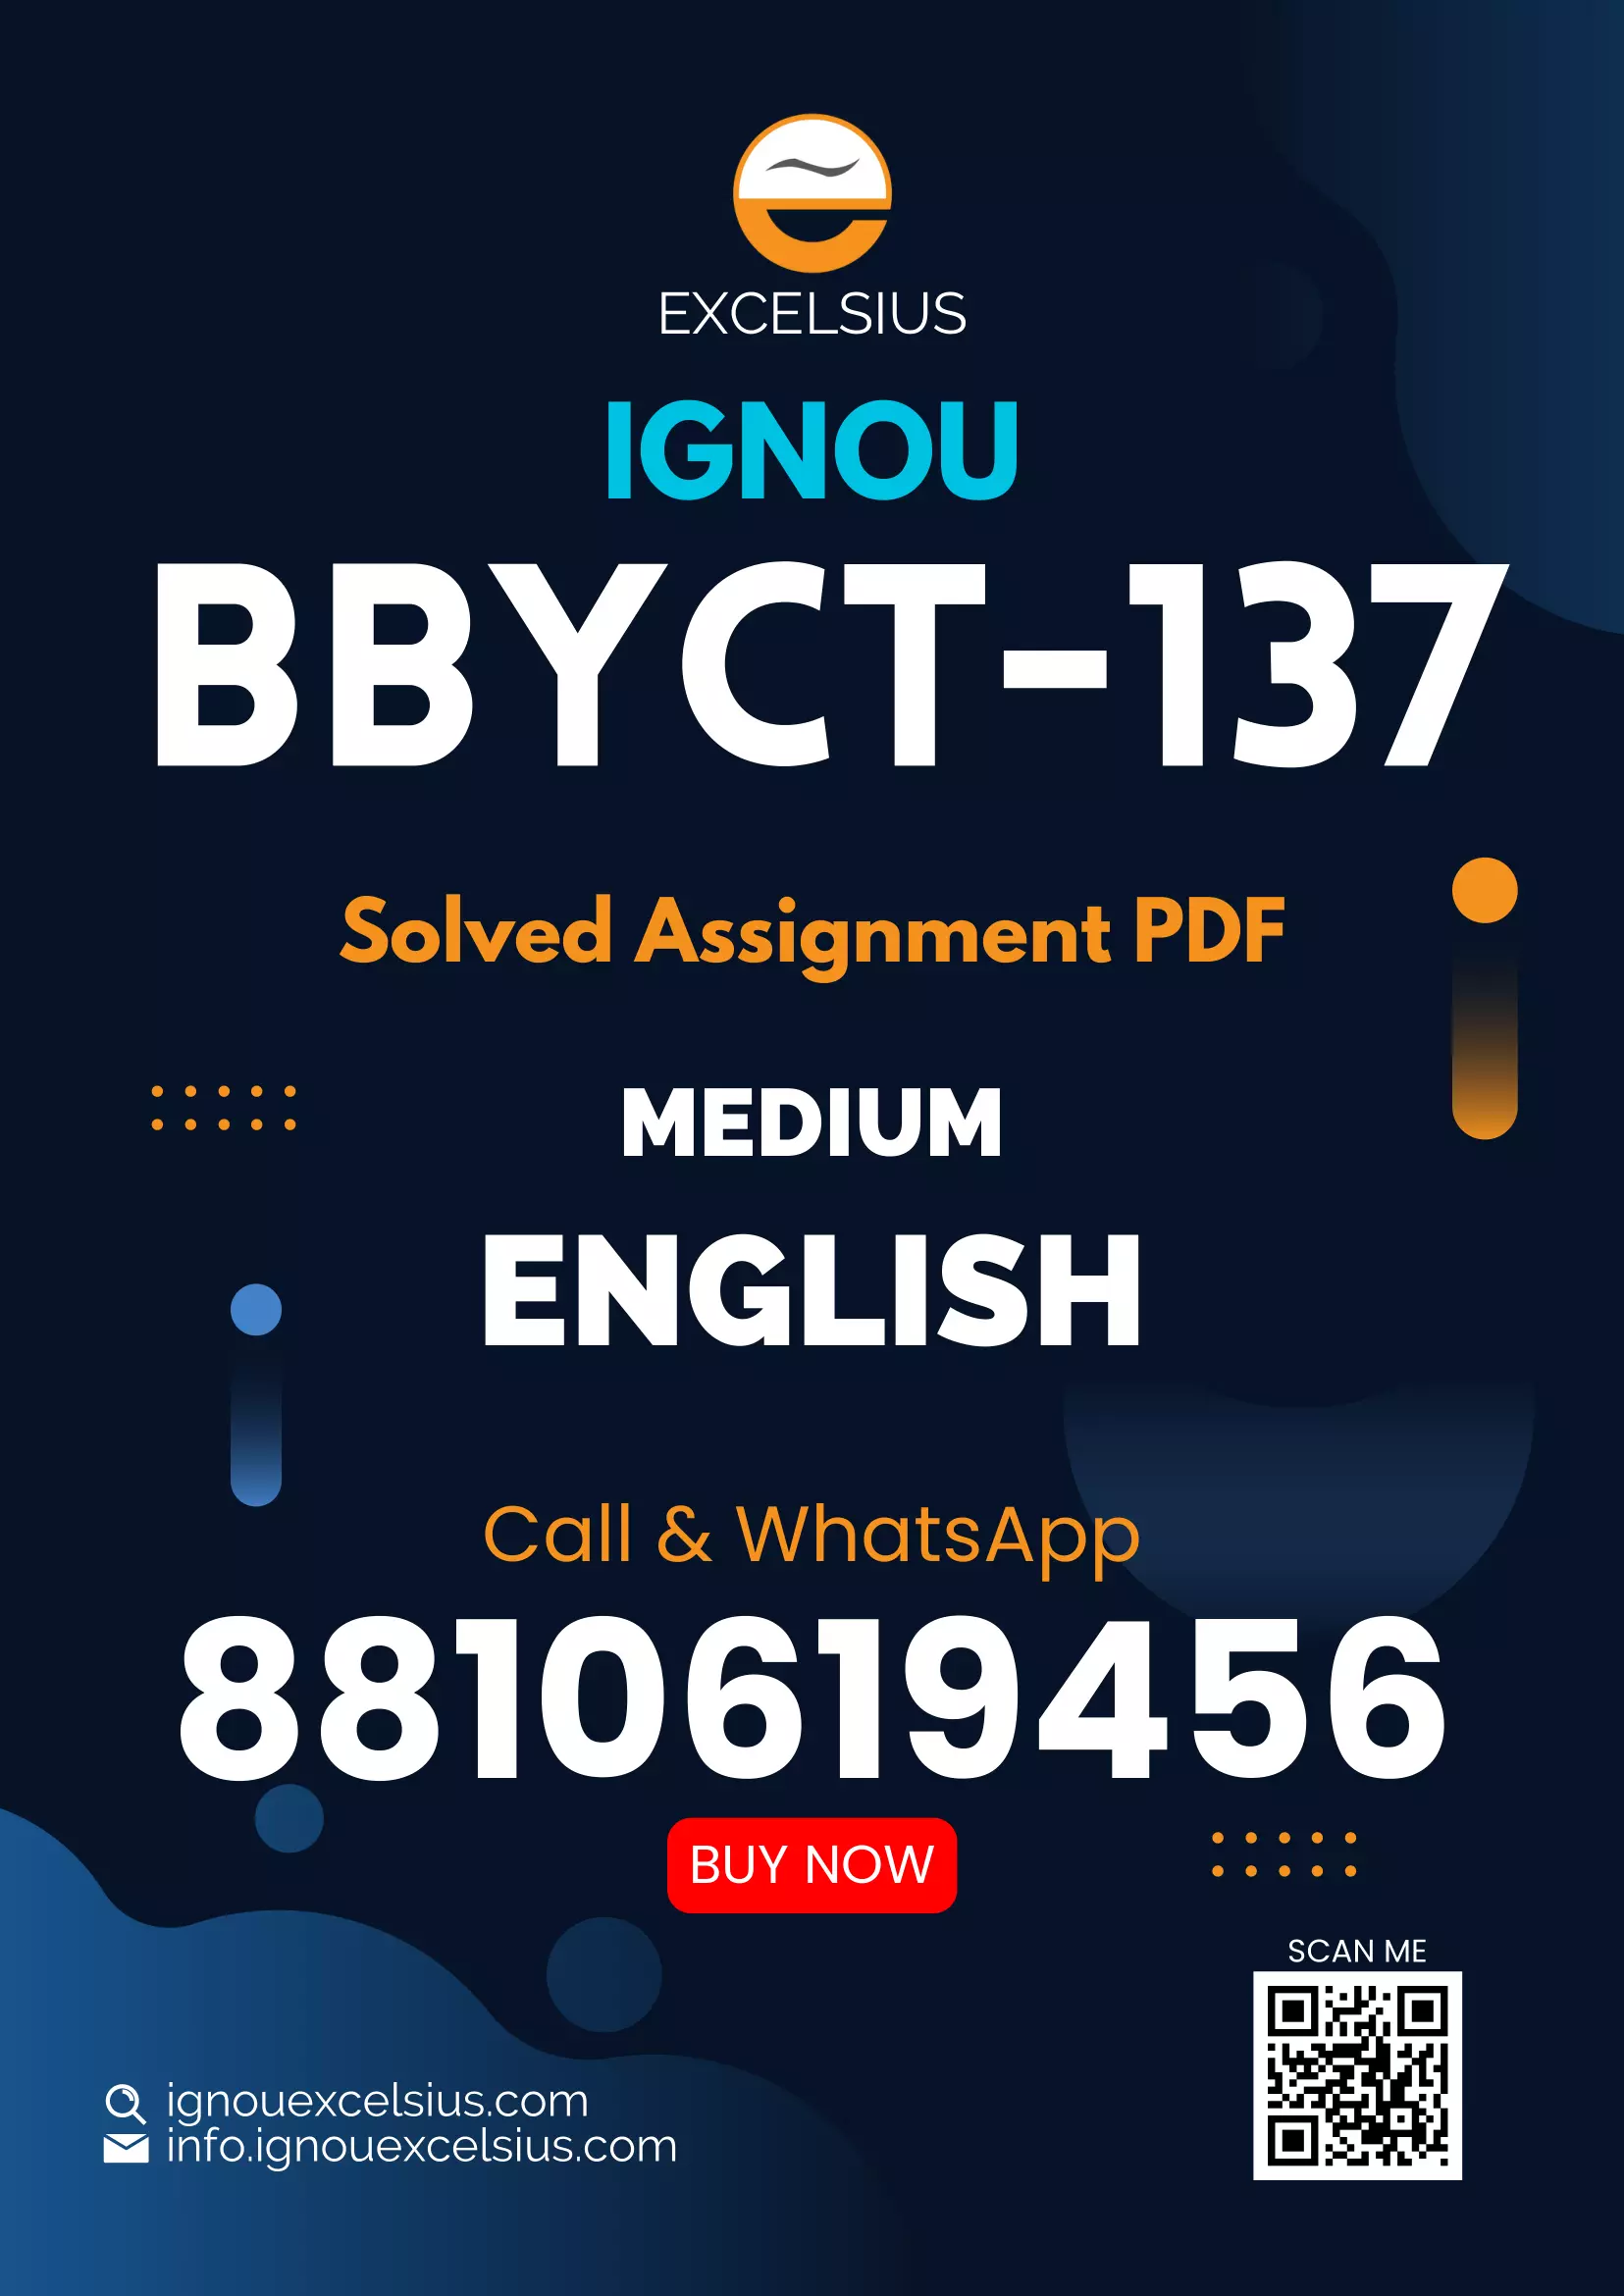 IGNOU BBYCT-137 - Plant Physiology and Metabolism, Latest Solved Assignment-January 2023 - December 2023